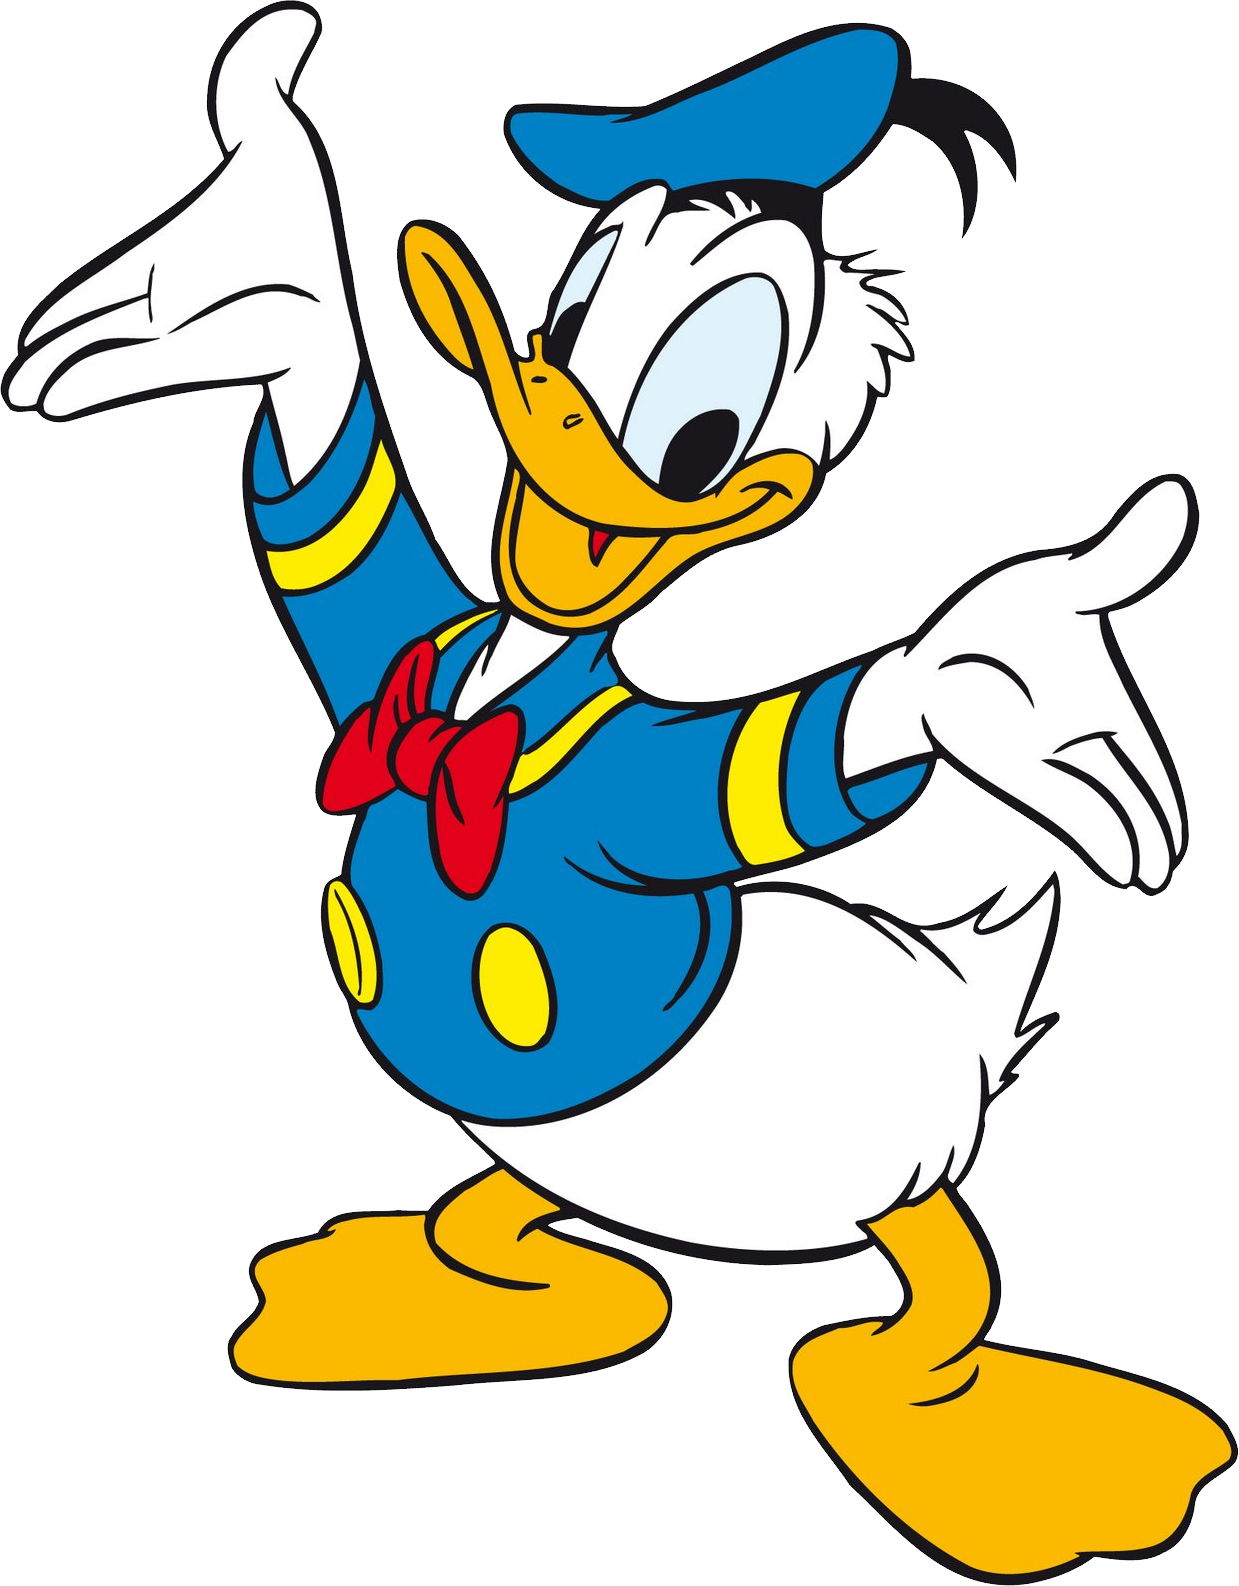 Daisy Duck PNG HD Quality